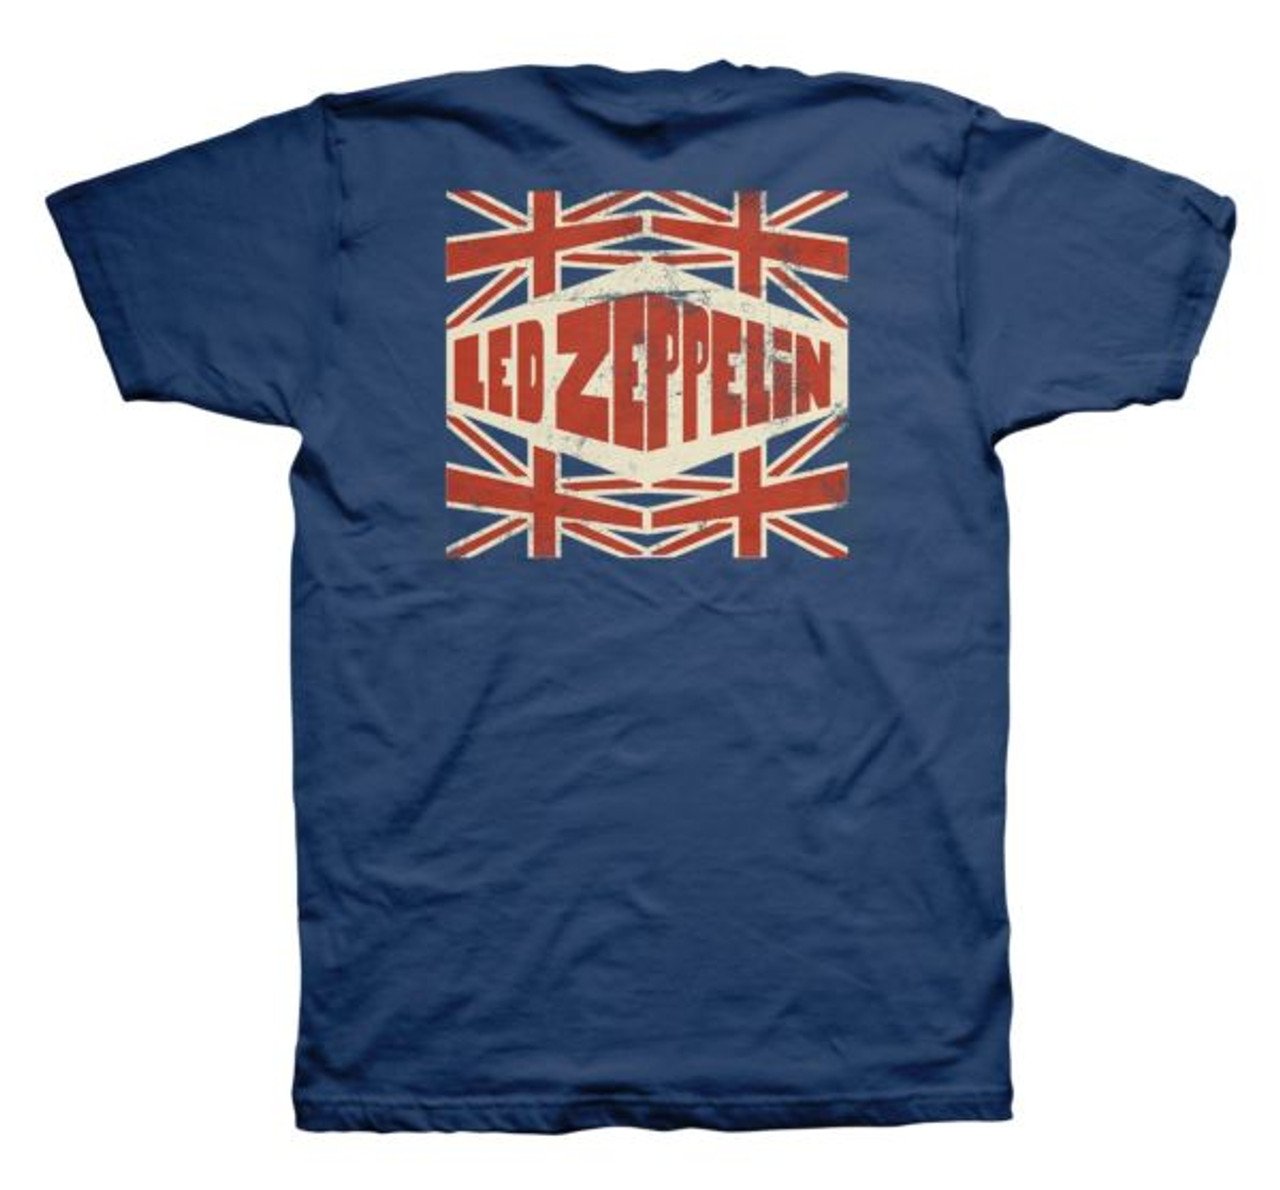 Led Zeppelin 2-sided Zeppelin and Union Jack Tee Shirt